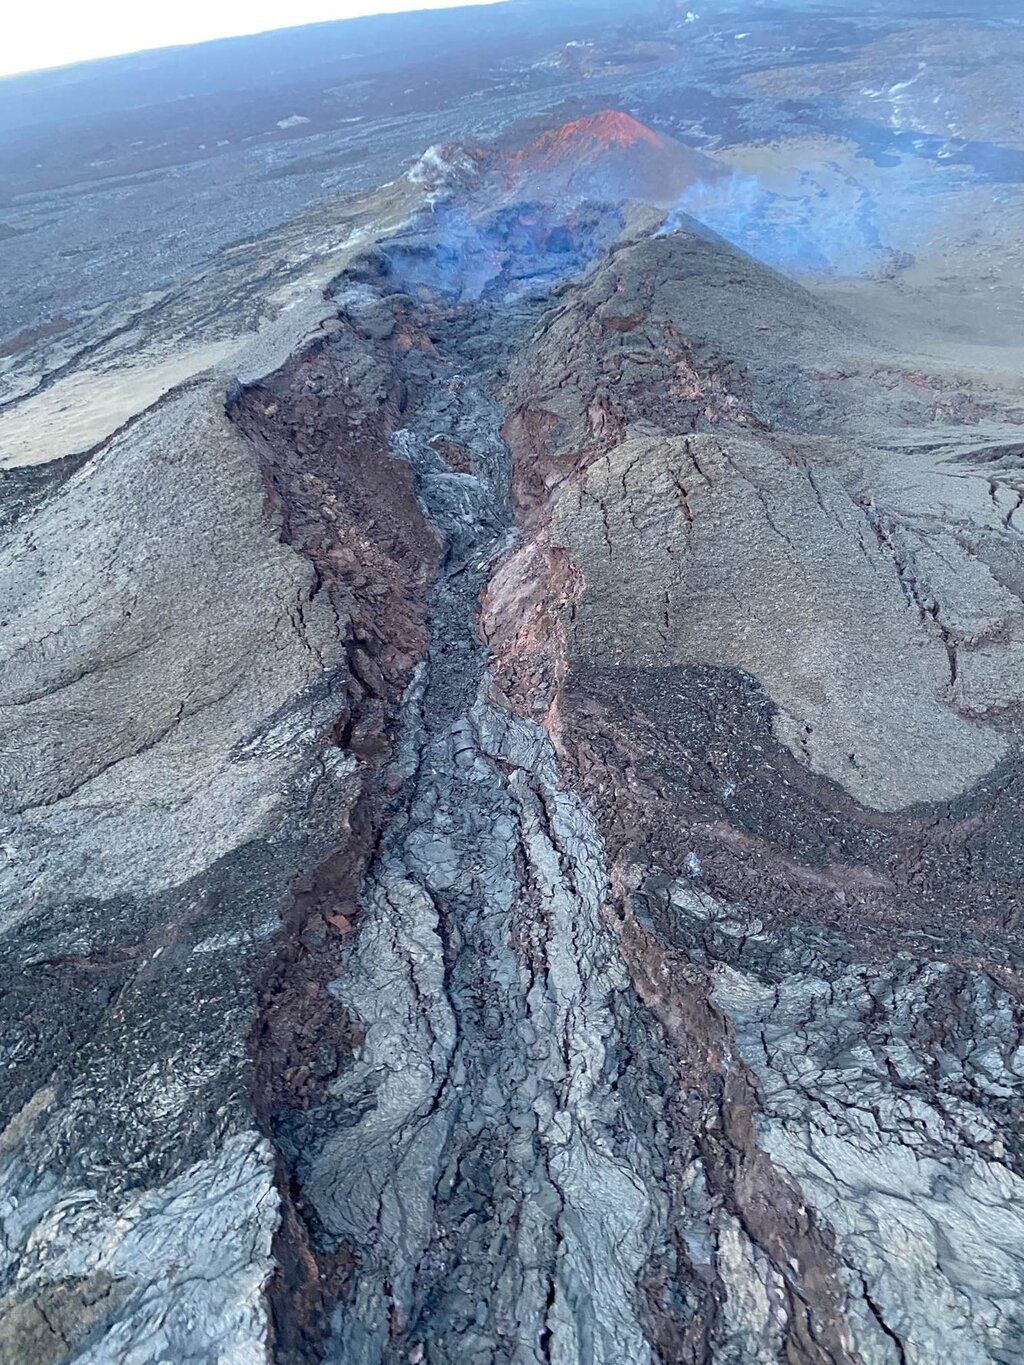 No lava movements in Fissure 3 detected (image: USGS)